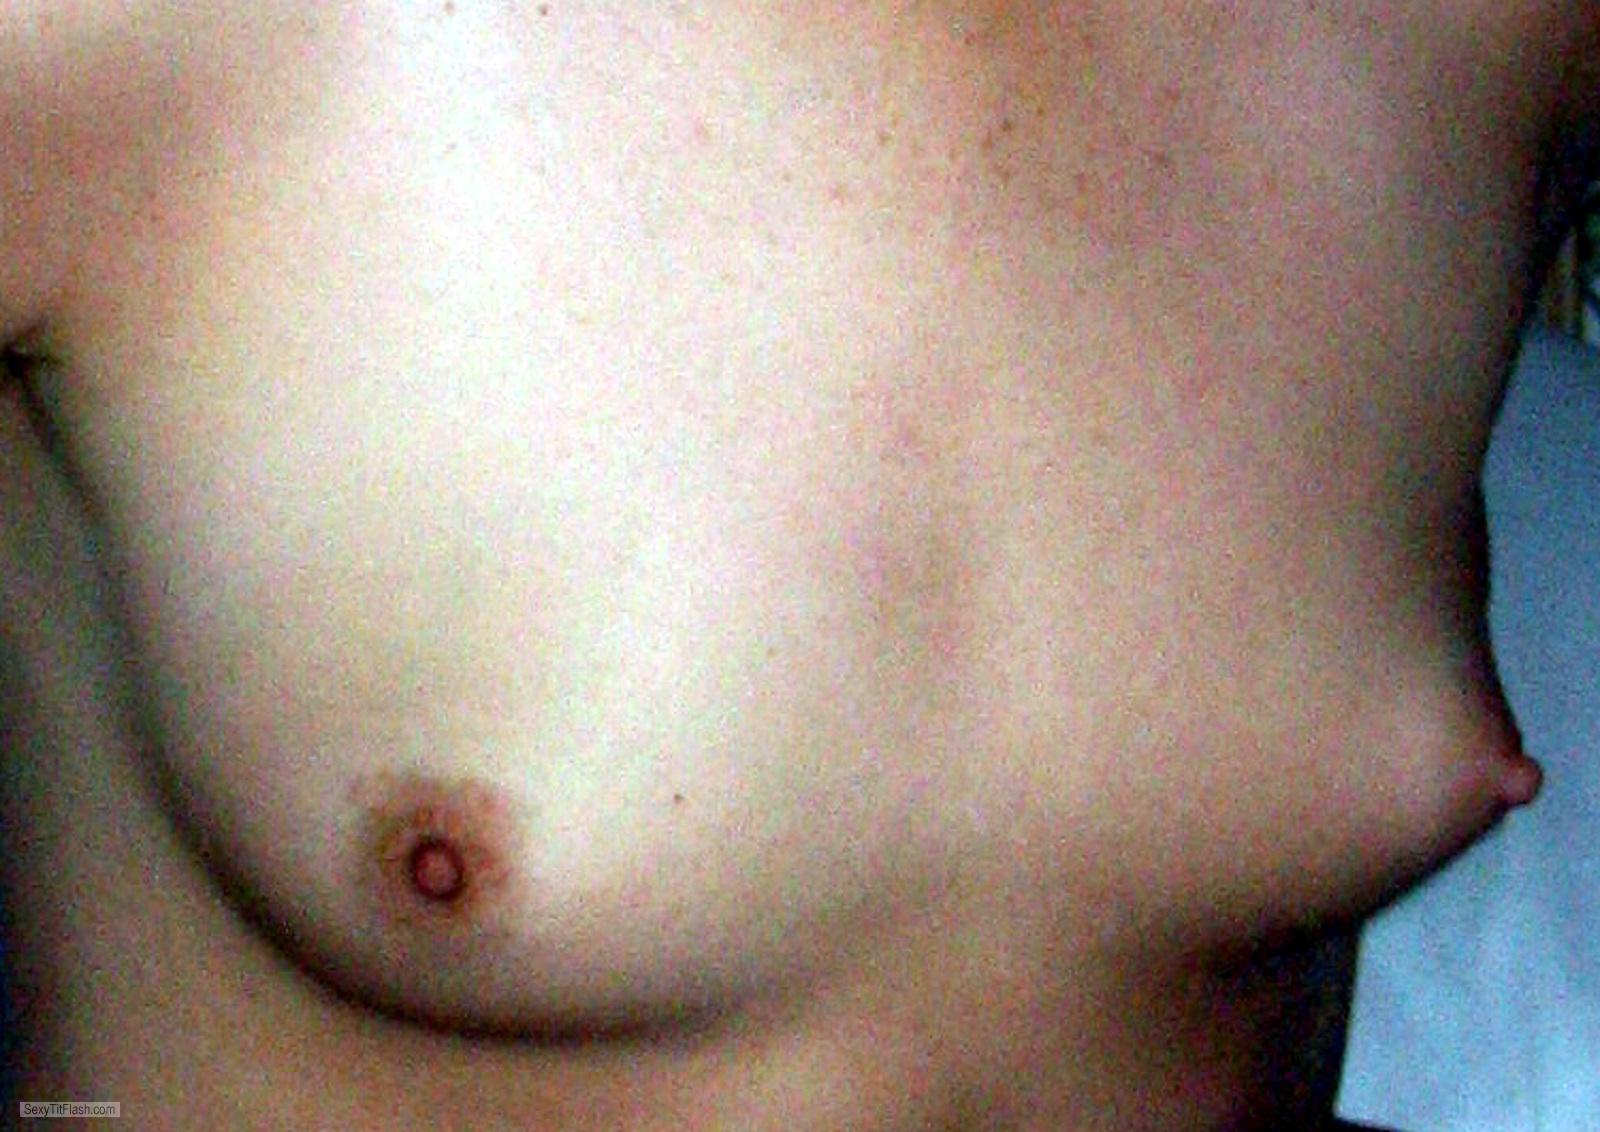 Very small Tits Of My Room Mate Mspurple